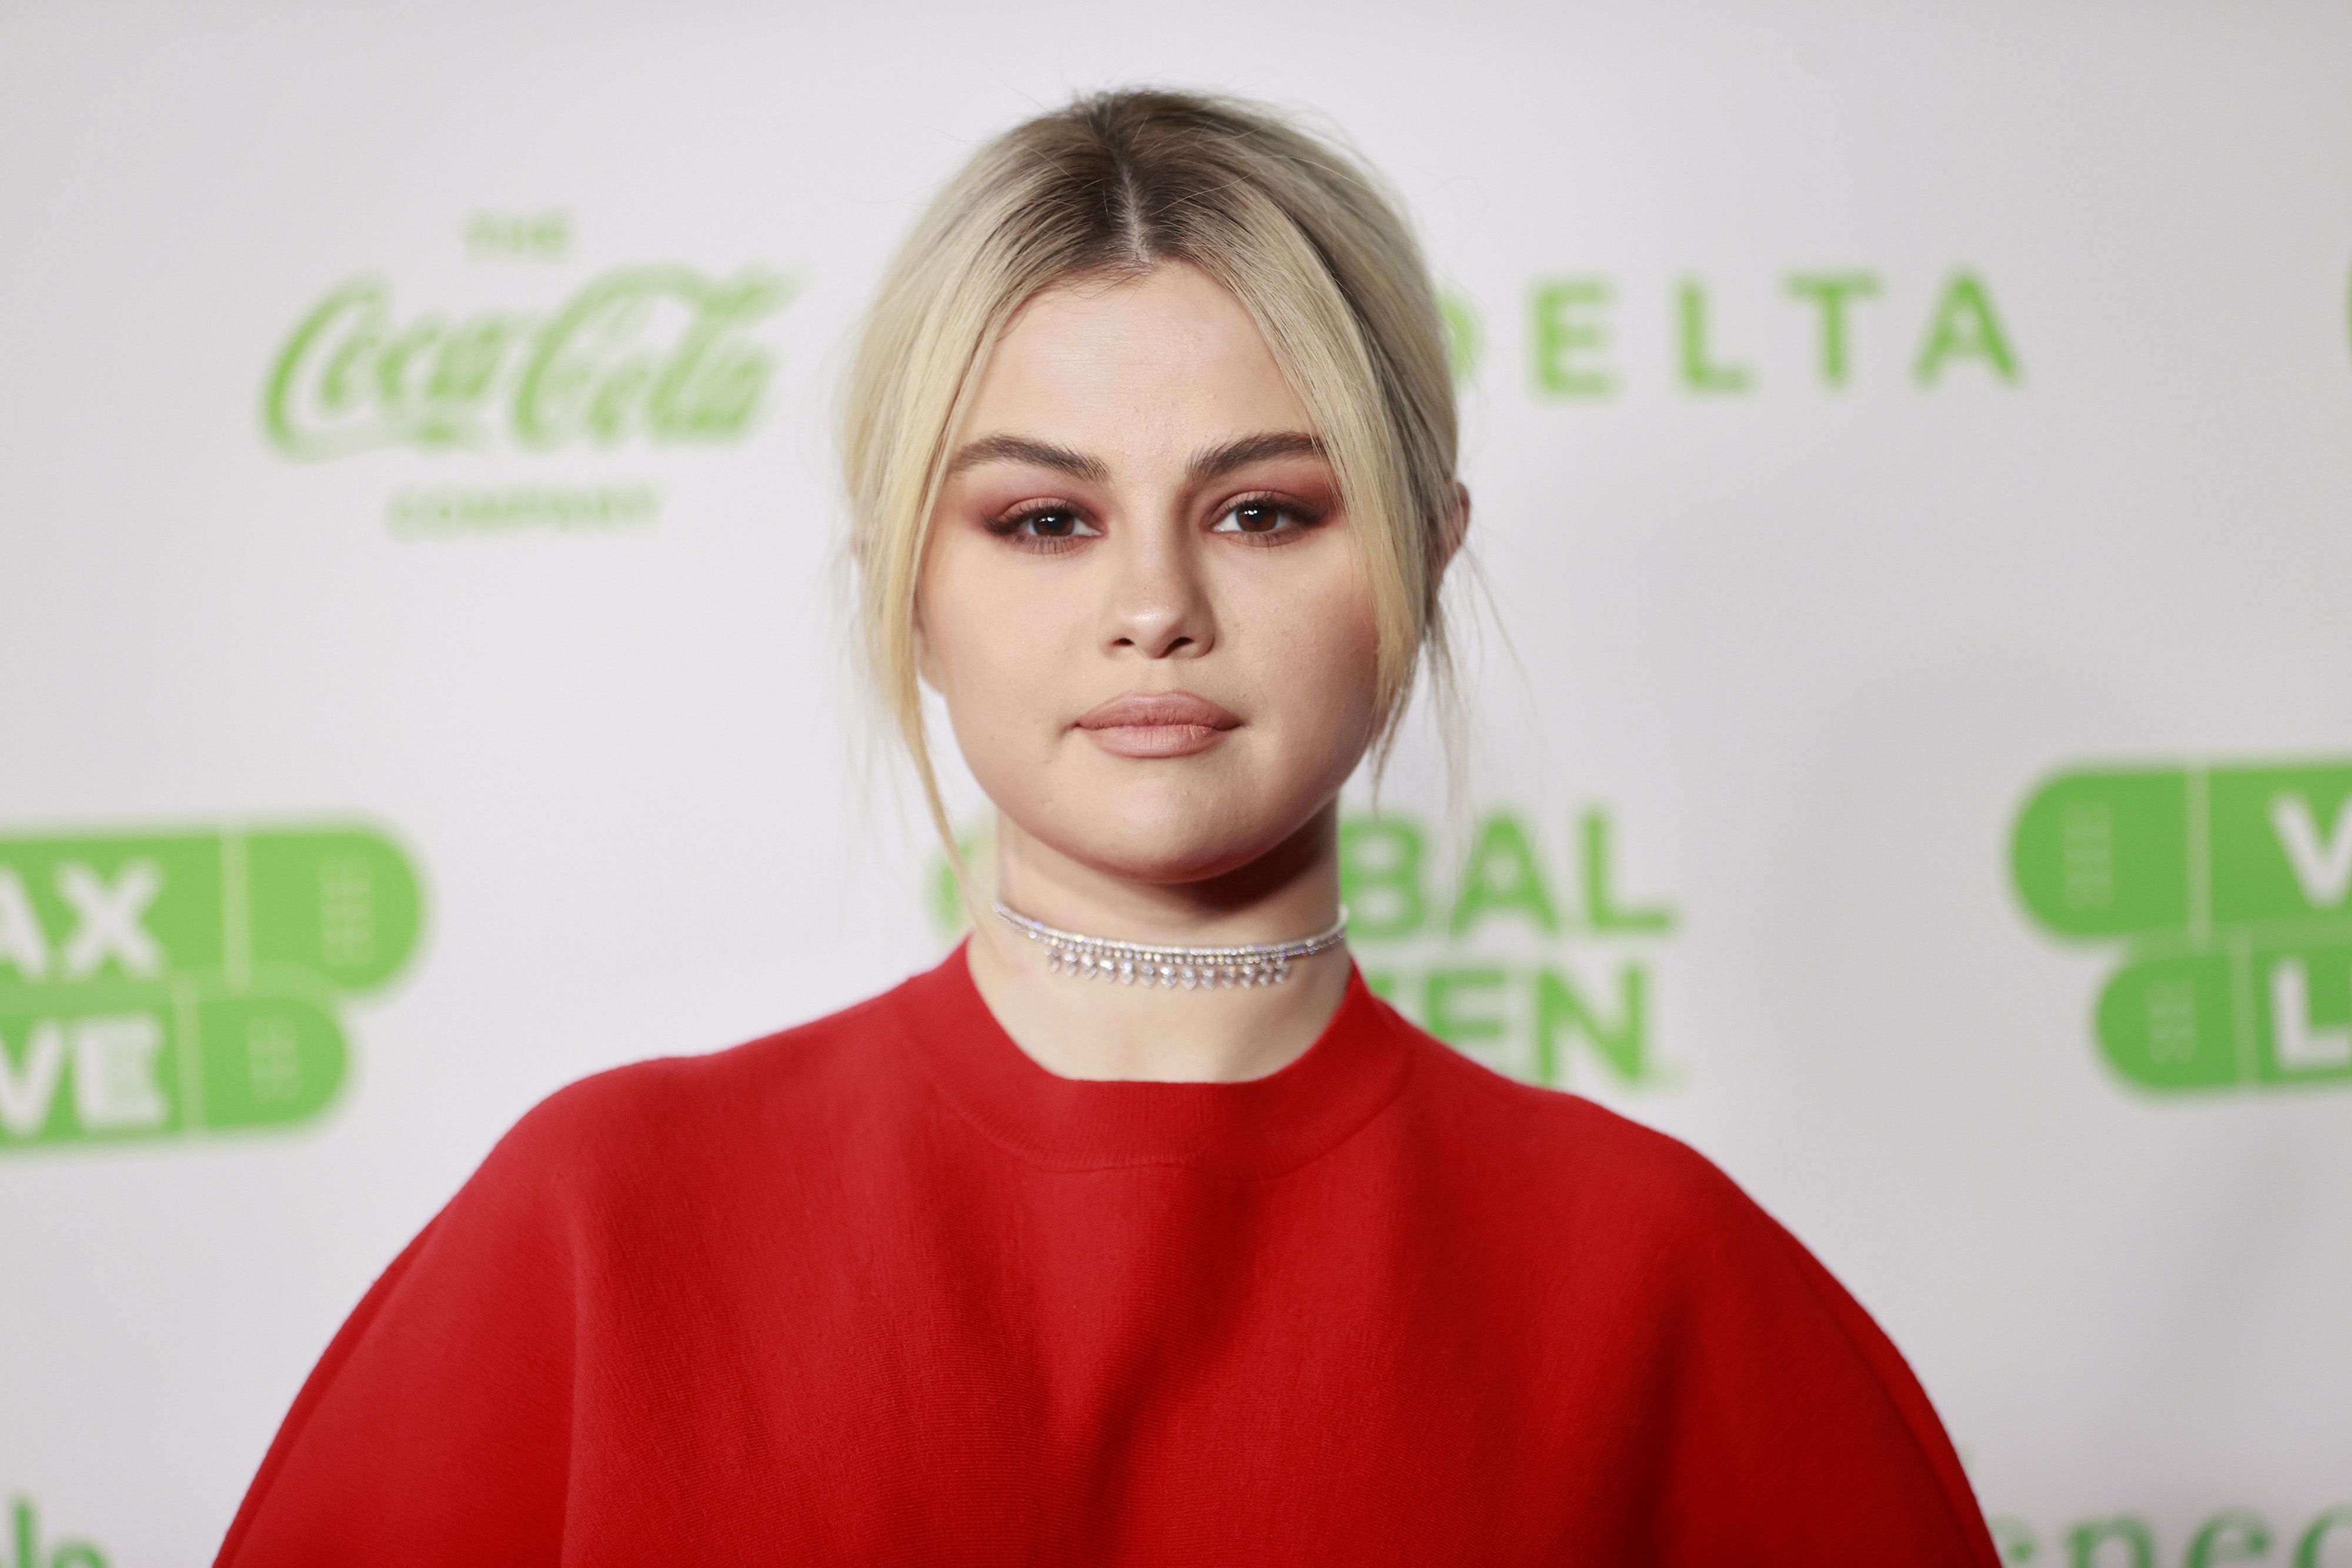 Selena Gomez with blonde hair, wearing a red sweater.